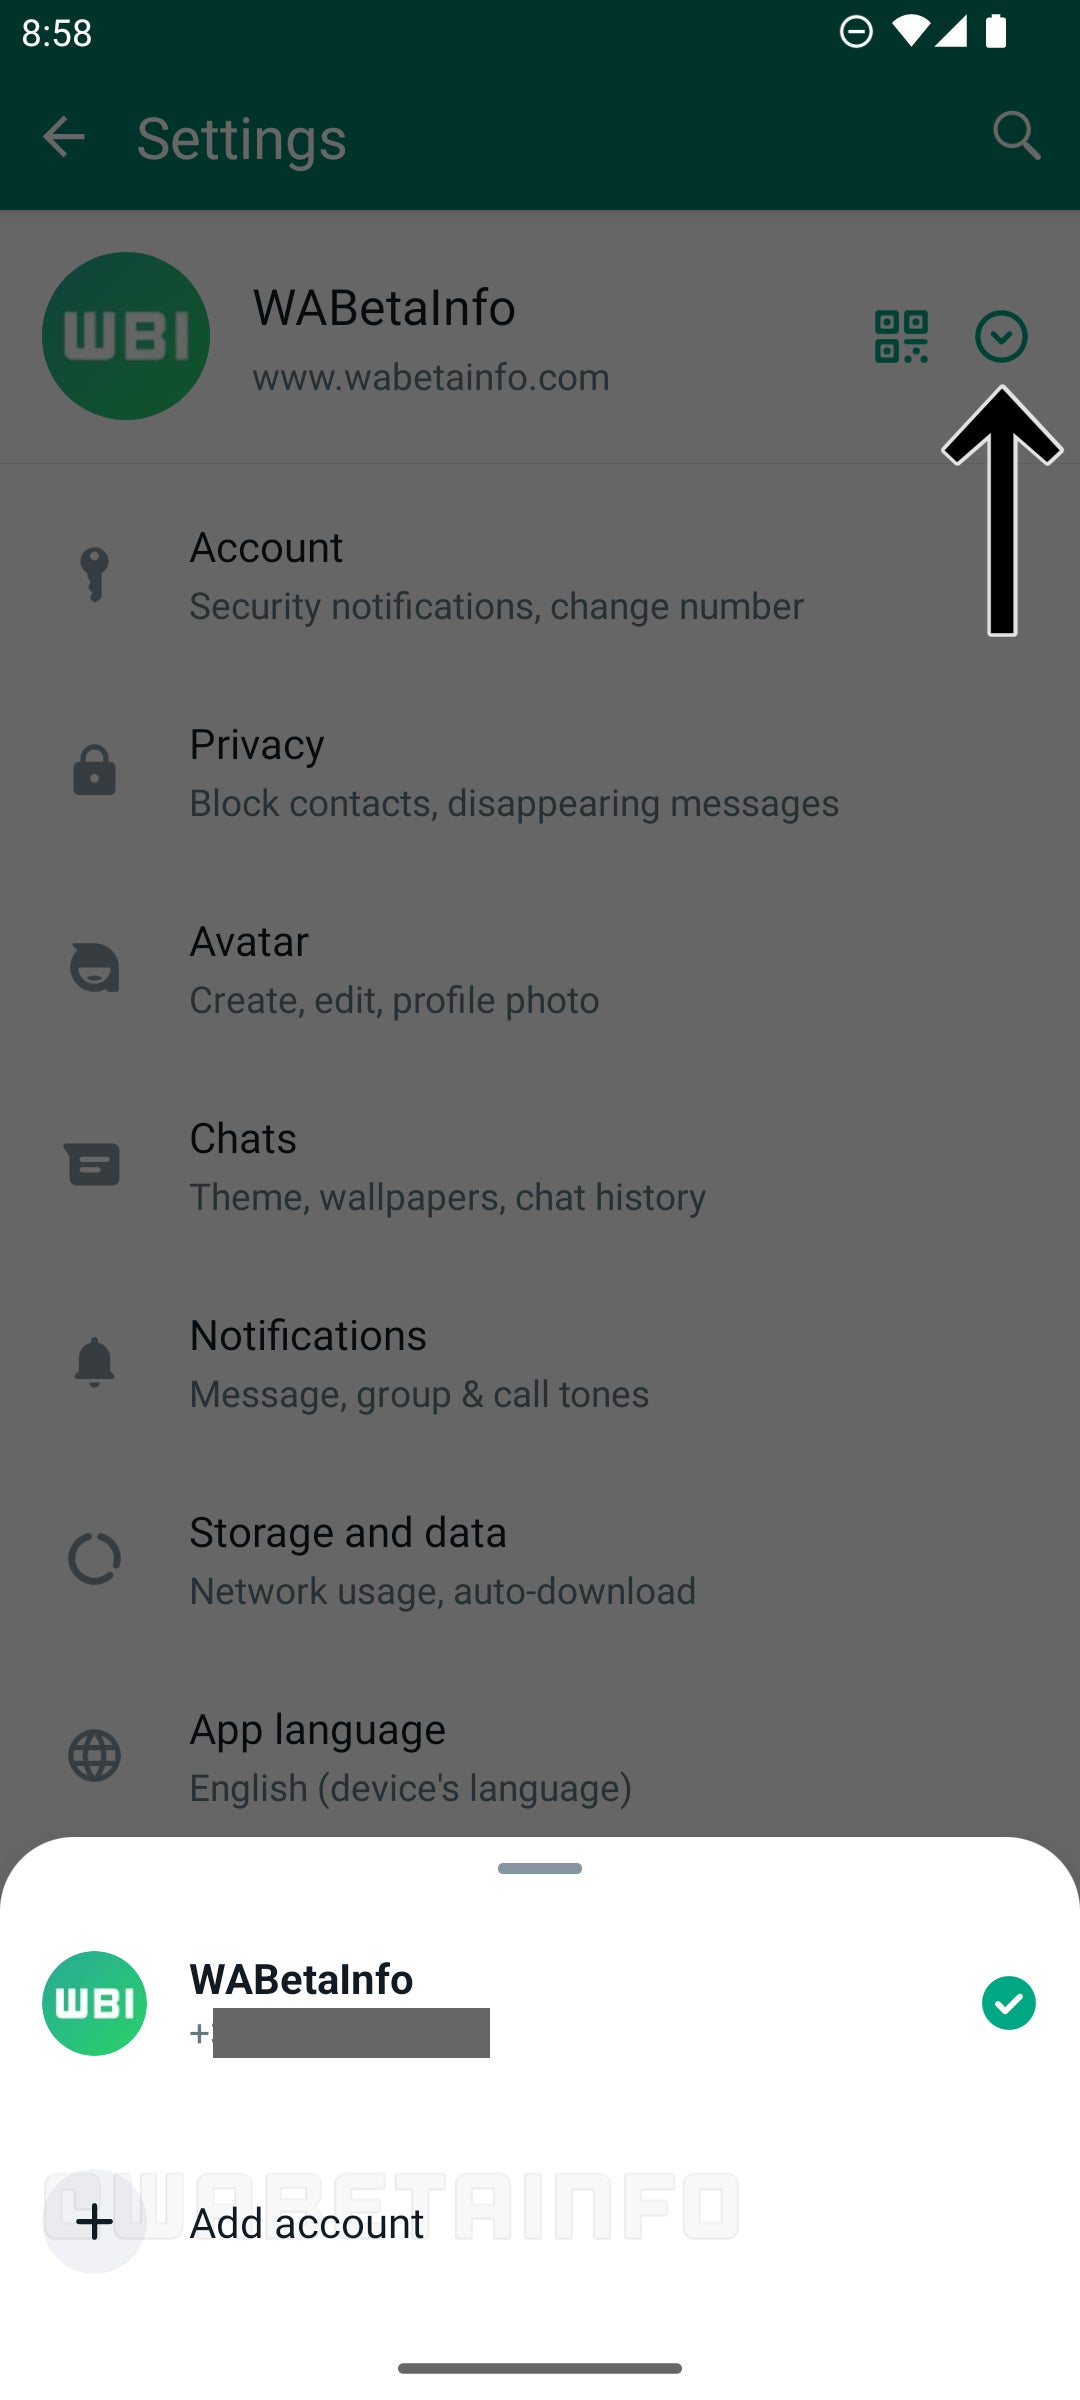 WhatsApp's multi-account support feature is now available for select beta users